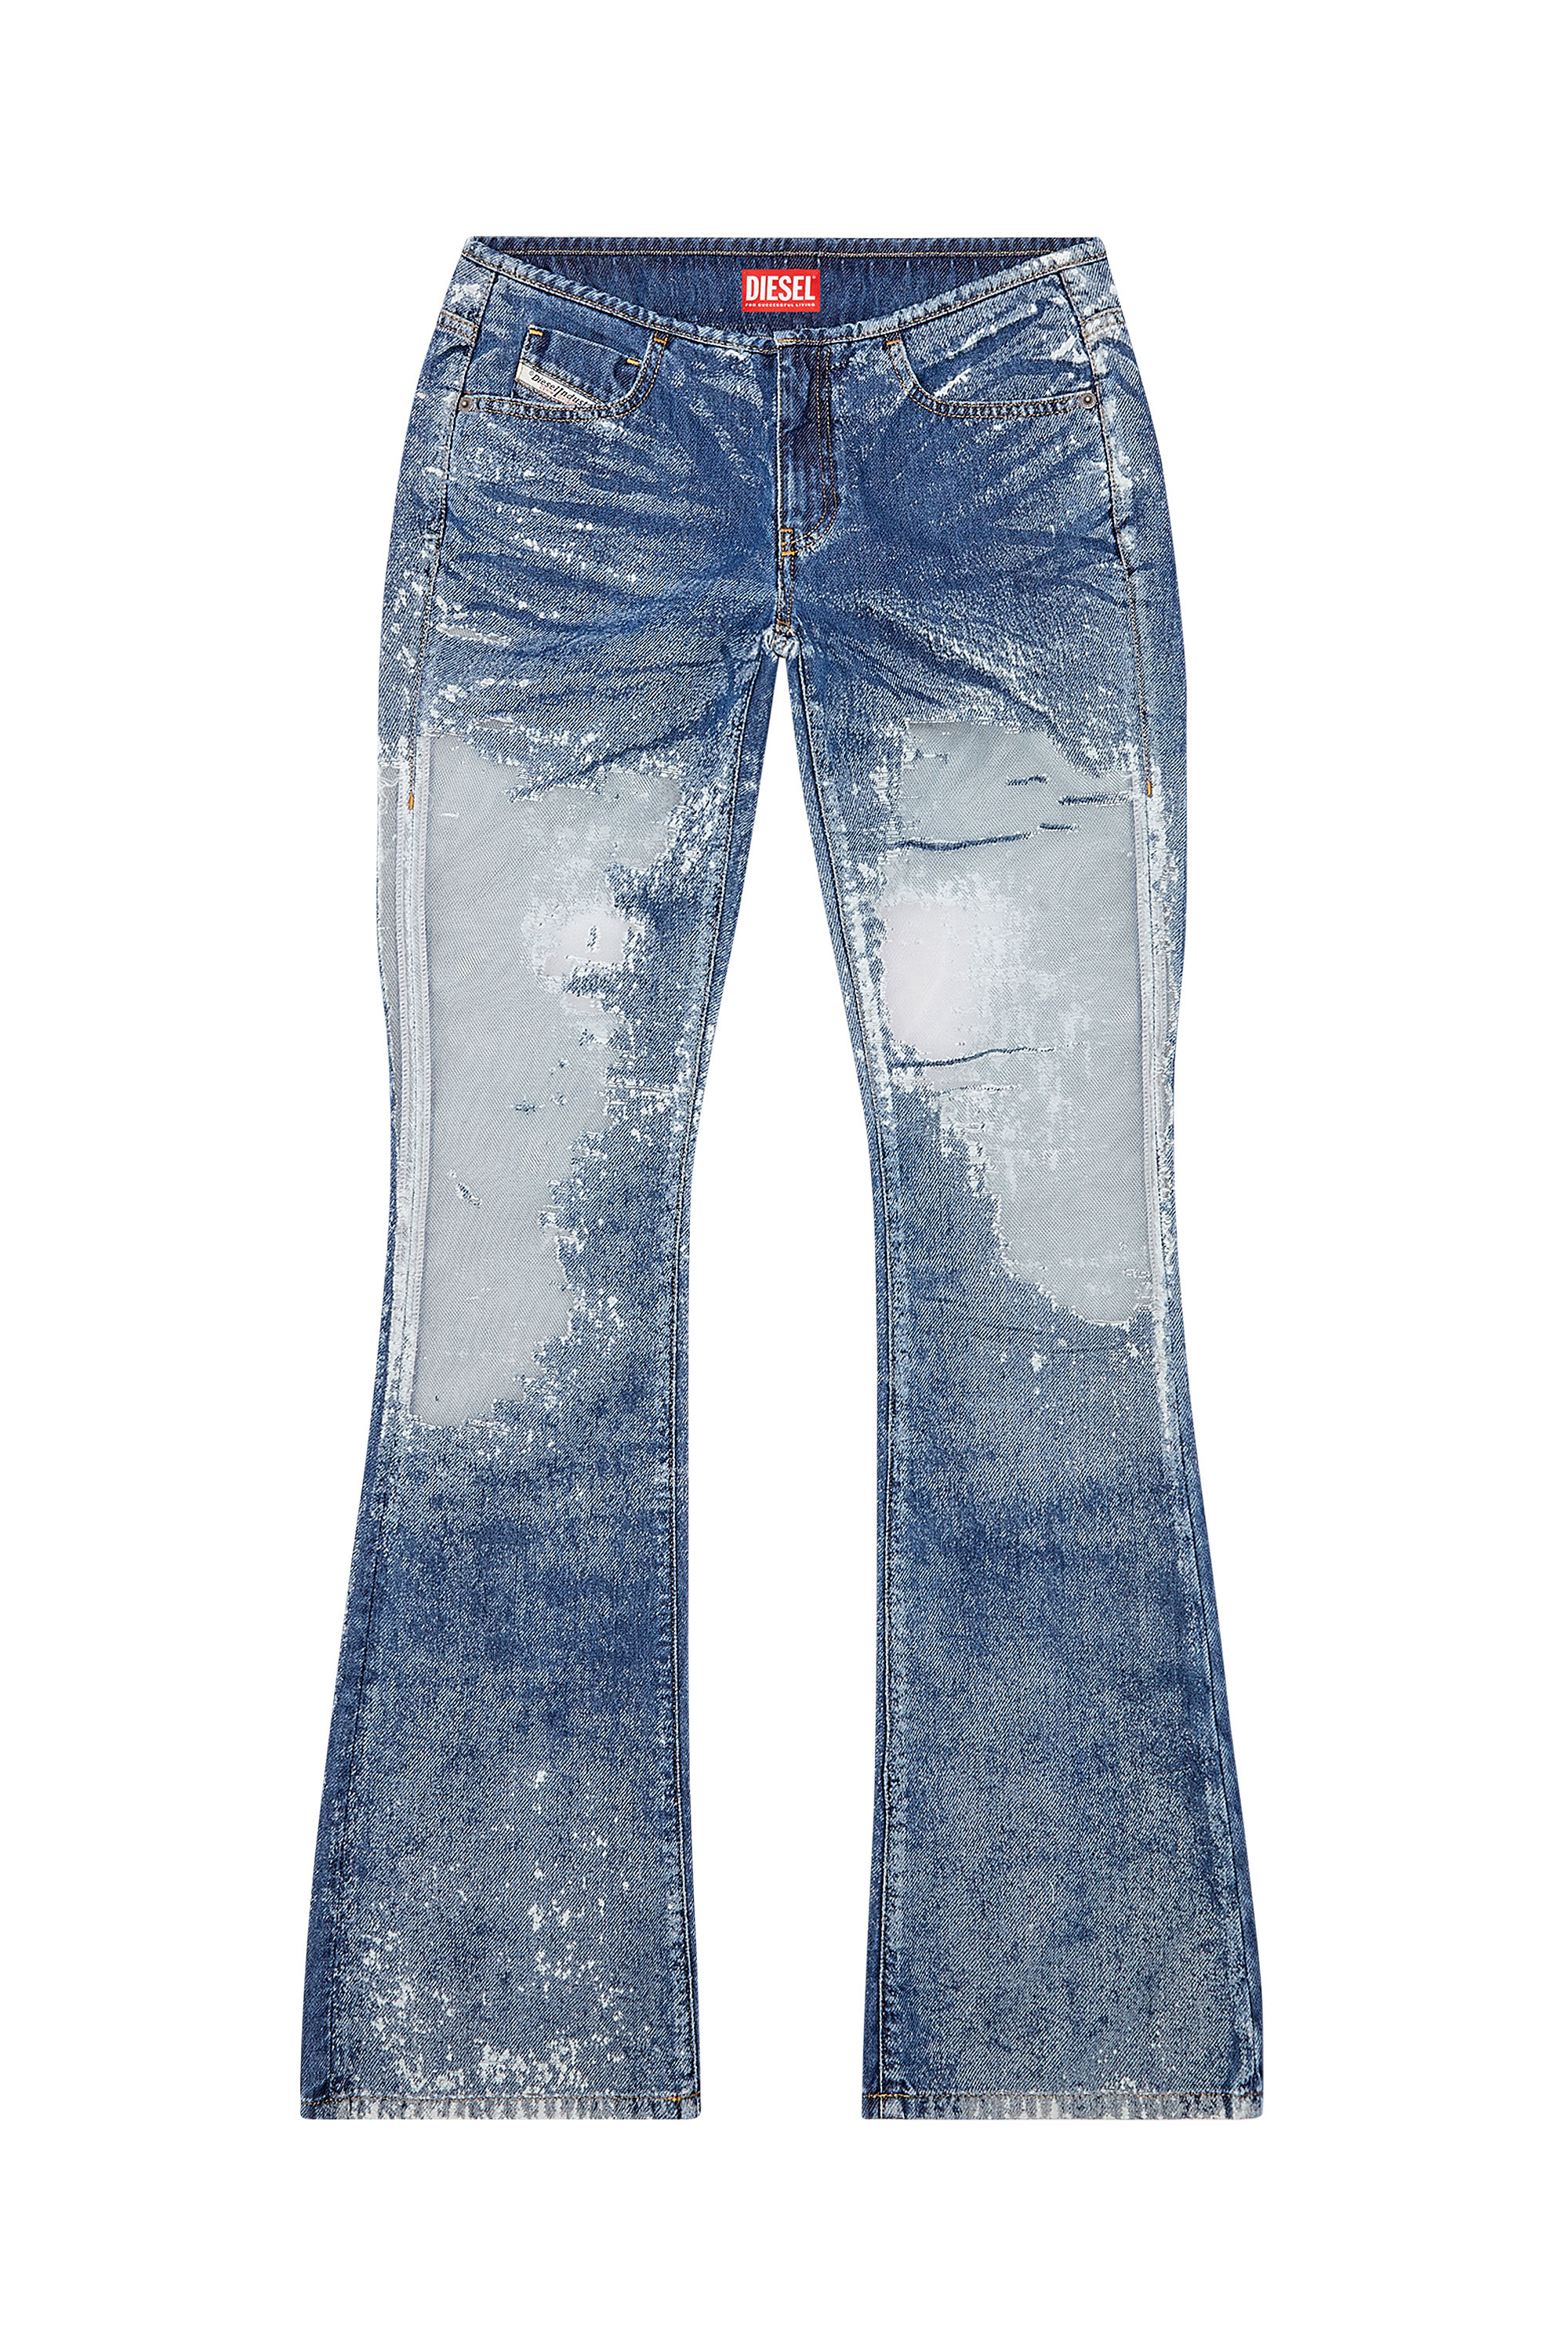 Bootcut and Flare Jeans D-Shark 068JH, Mittelblau - Jeans